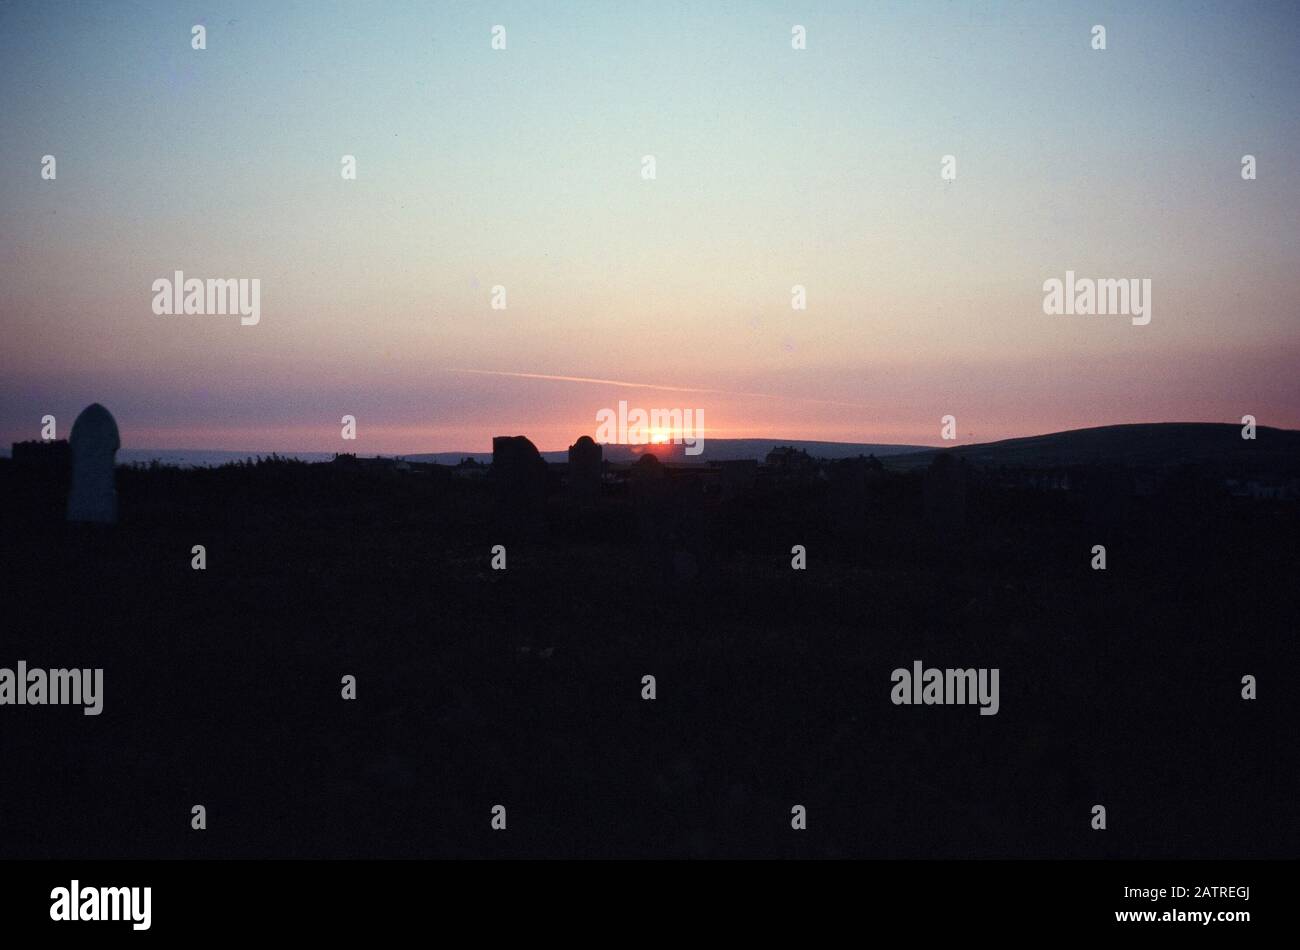 Vernacular photograph taken on a 35mm analog film transparency, believed to depict silhouette of houses during sunset, 1970. Major topics/objects detected include Sky, Sunset, Dawn, Dusk, Evening, Hill and Sun. () Stock Photo